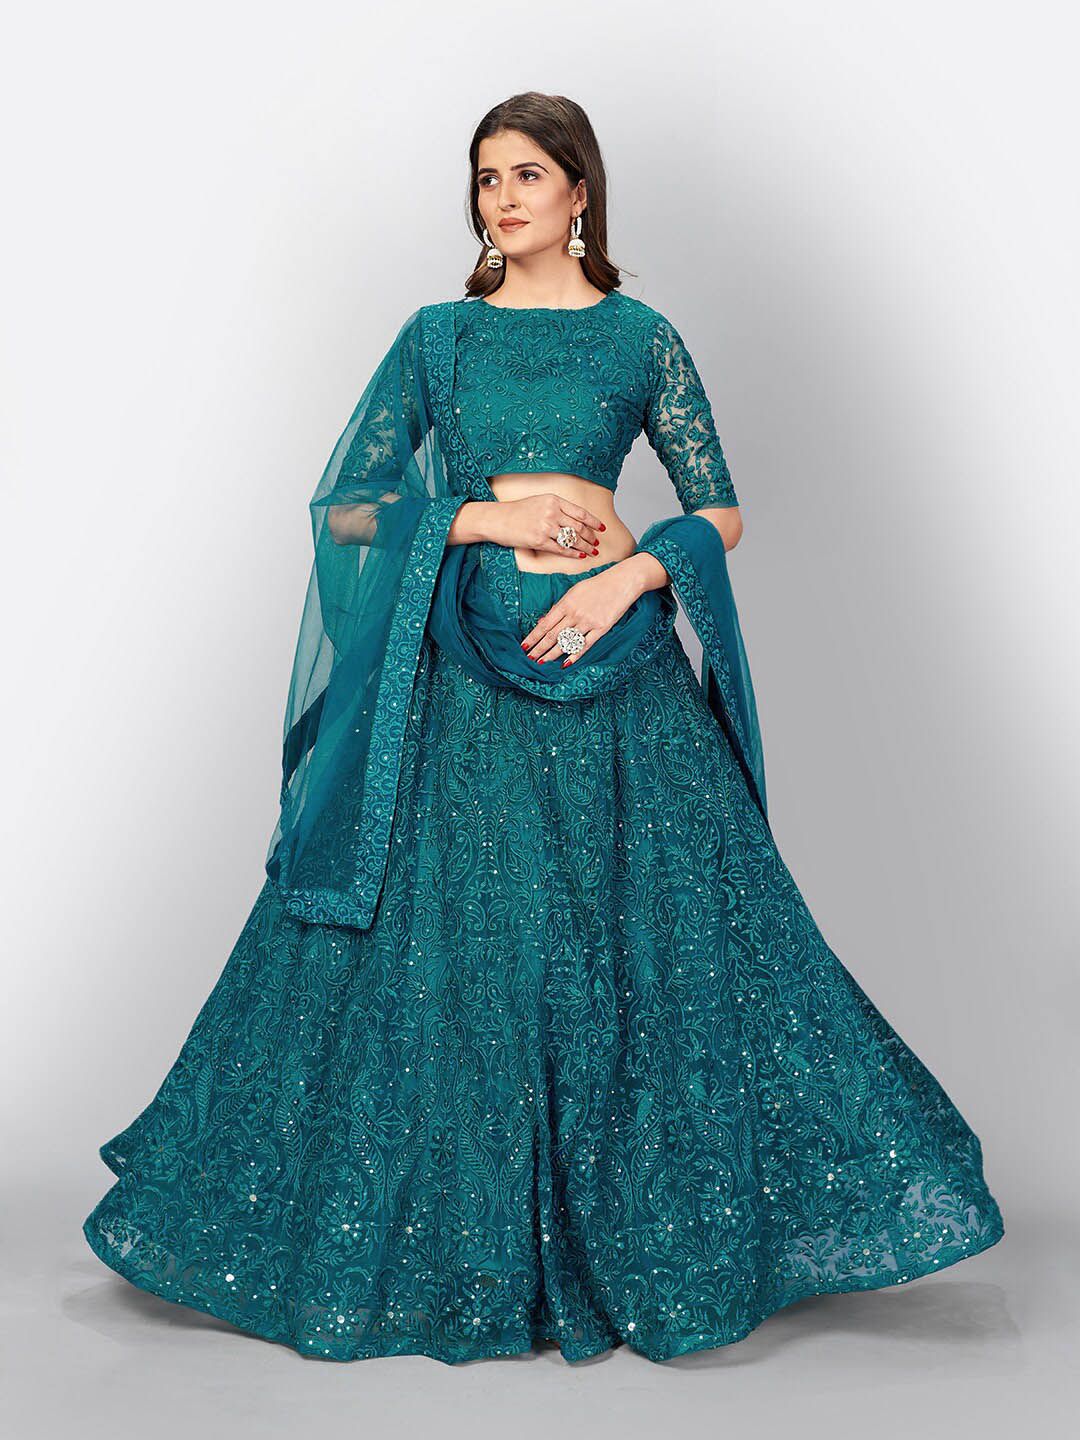 SHOPGARB Blue Embroidered Sequinned Semi-Stitched Lehenga Choli Price in India